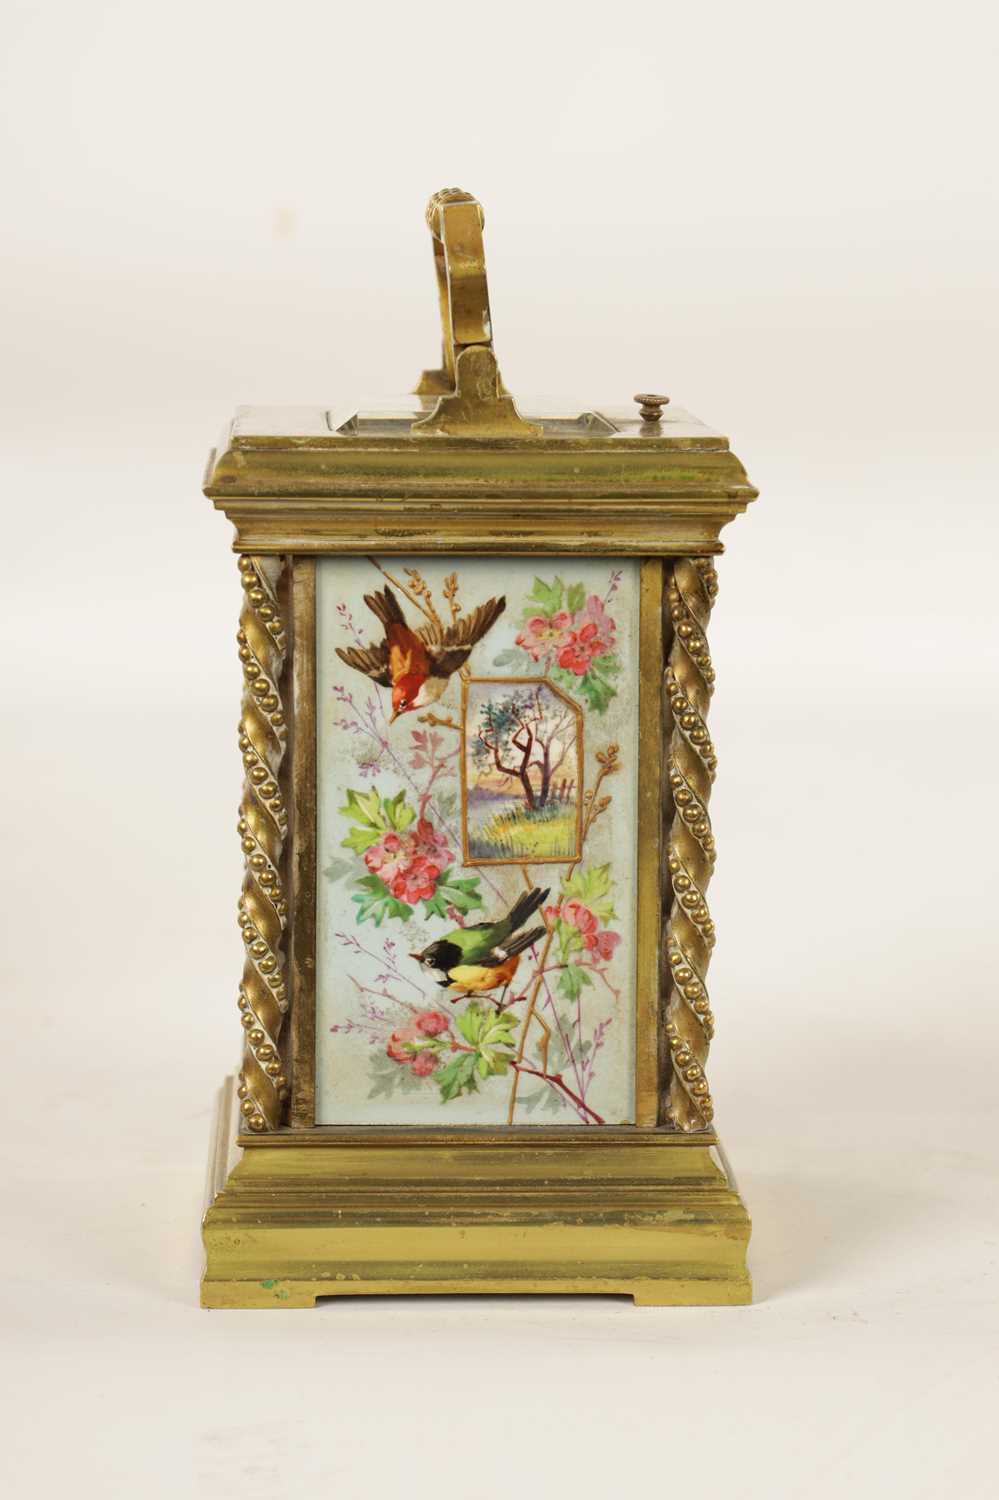 A LATE 19TH CENTURY FRENCH PORCELAIN PANELLED REPEATING CARRIAGE CLOCK - Image 3 of 7